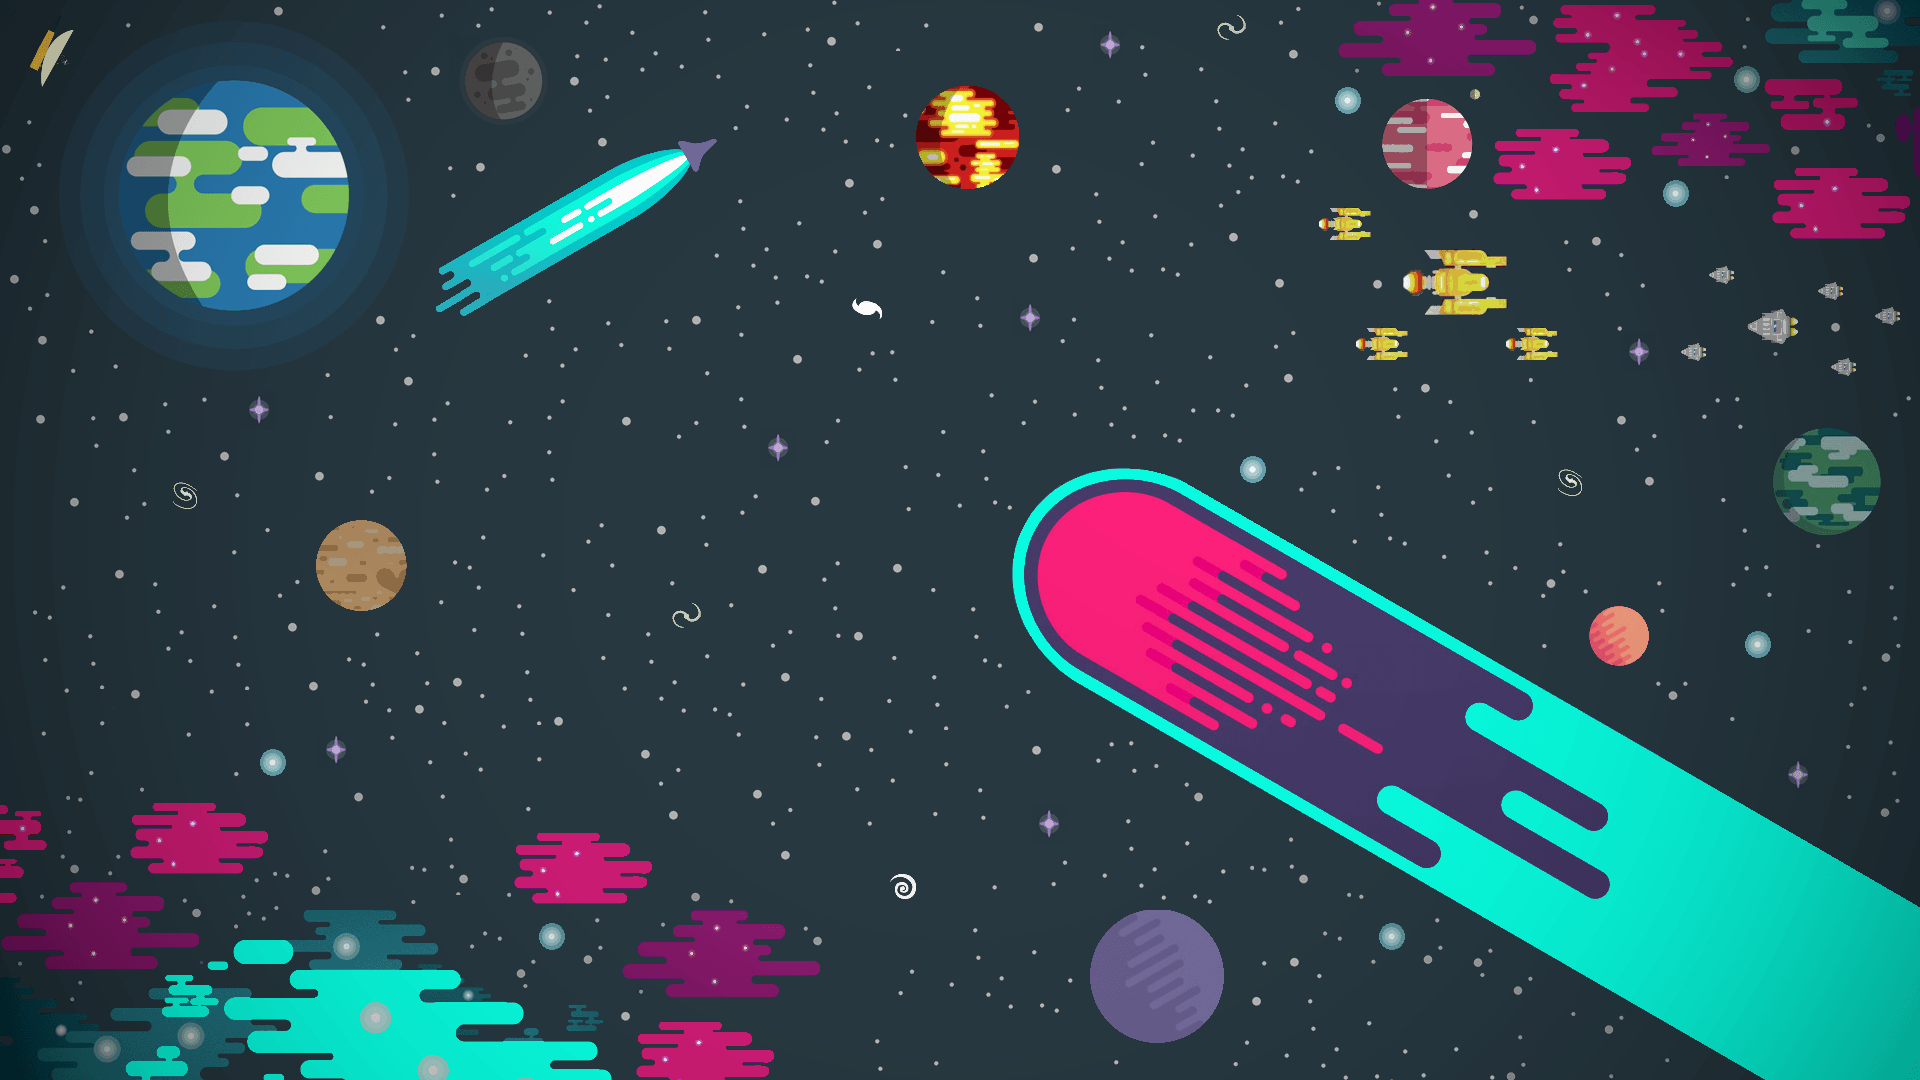 Space wallpaper with colorful planets, stars, and a rocket - Lo fi